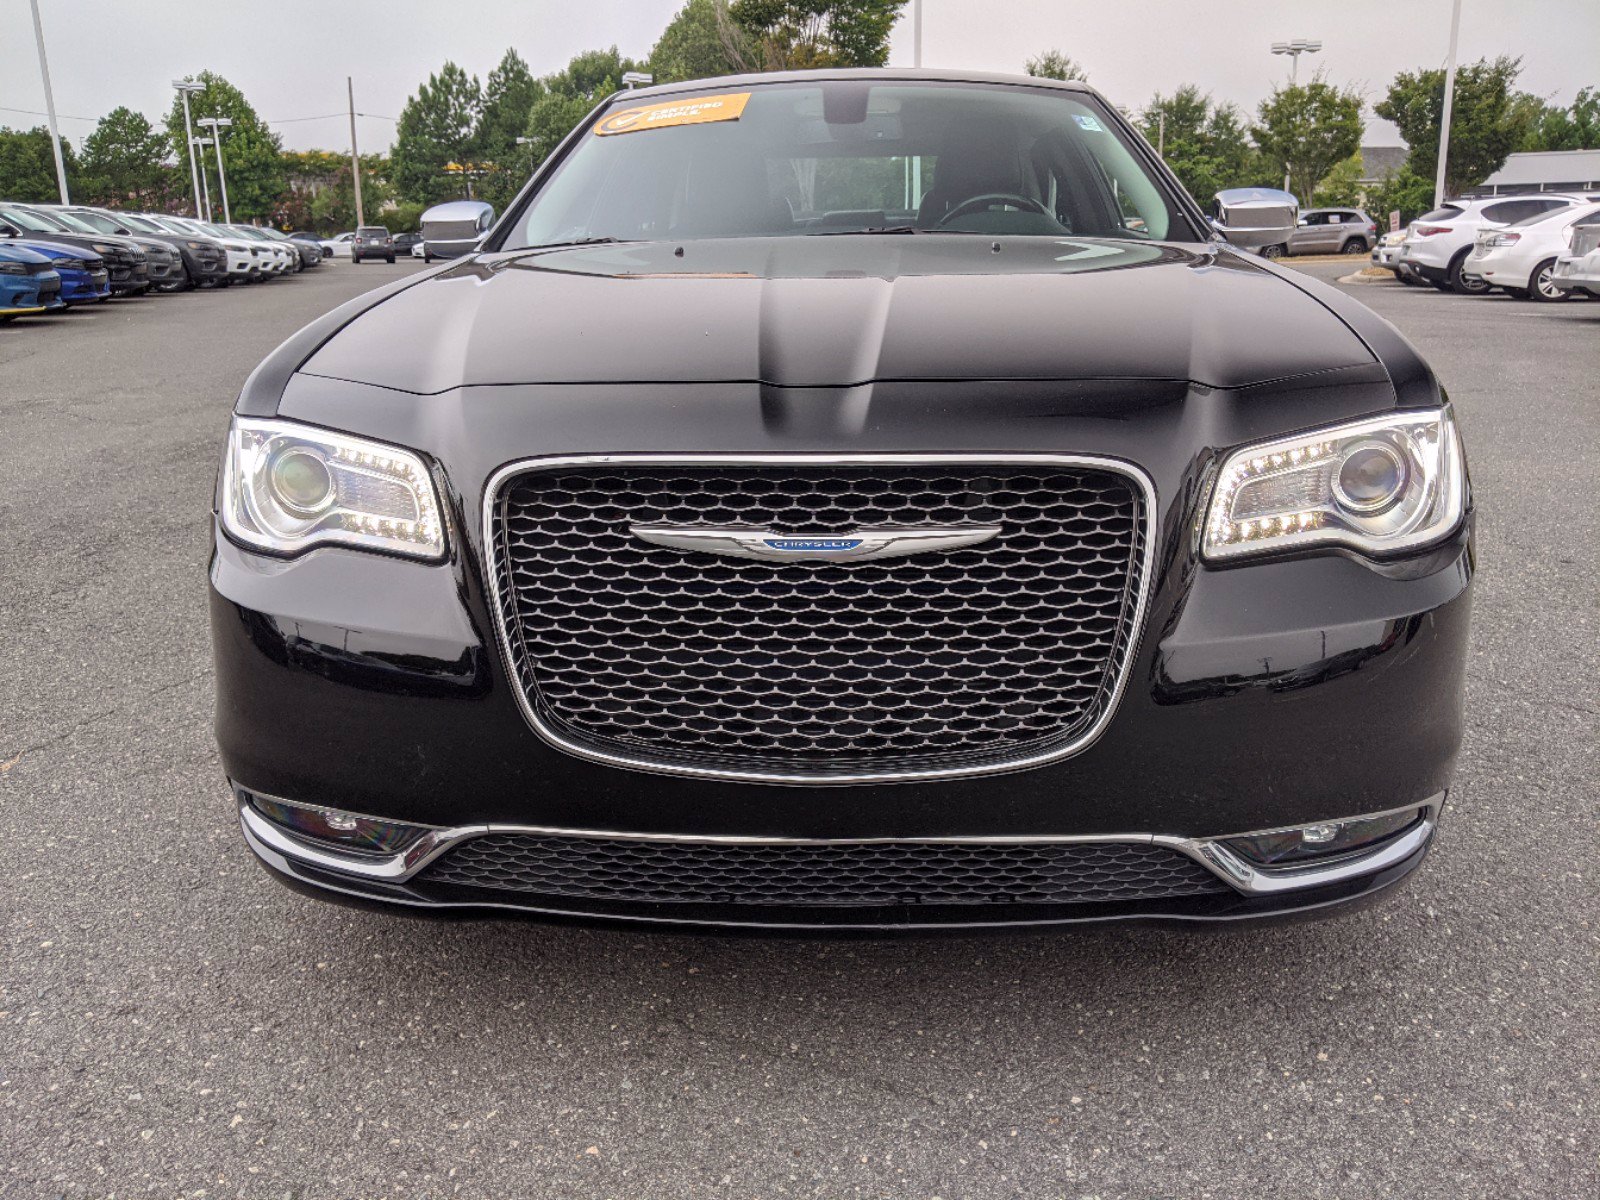 Certified PreOwned 2018 Chrysler 300 Limited RWD 4dr Car